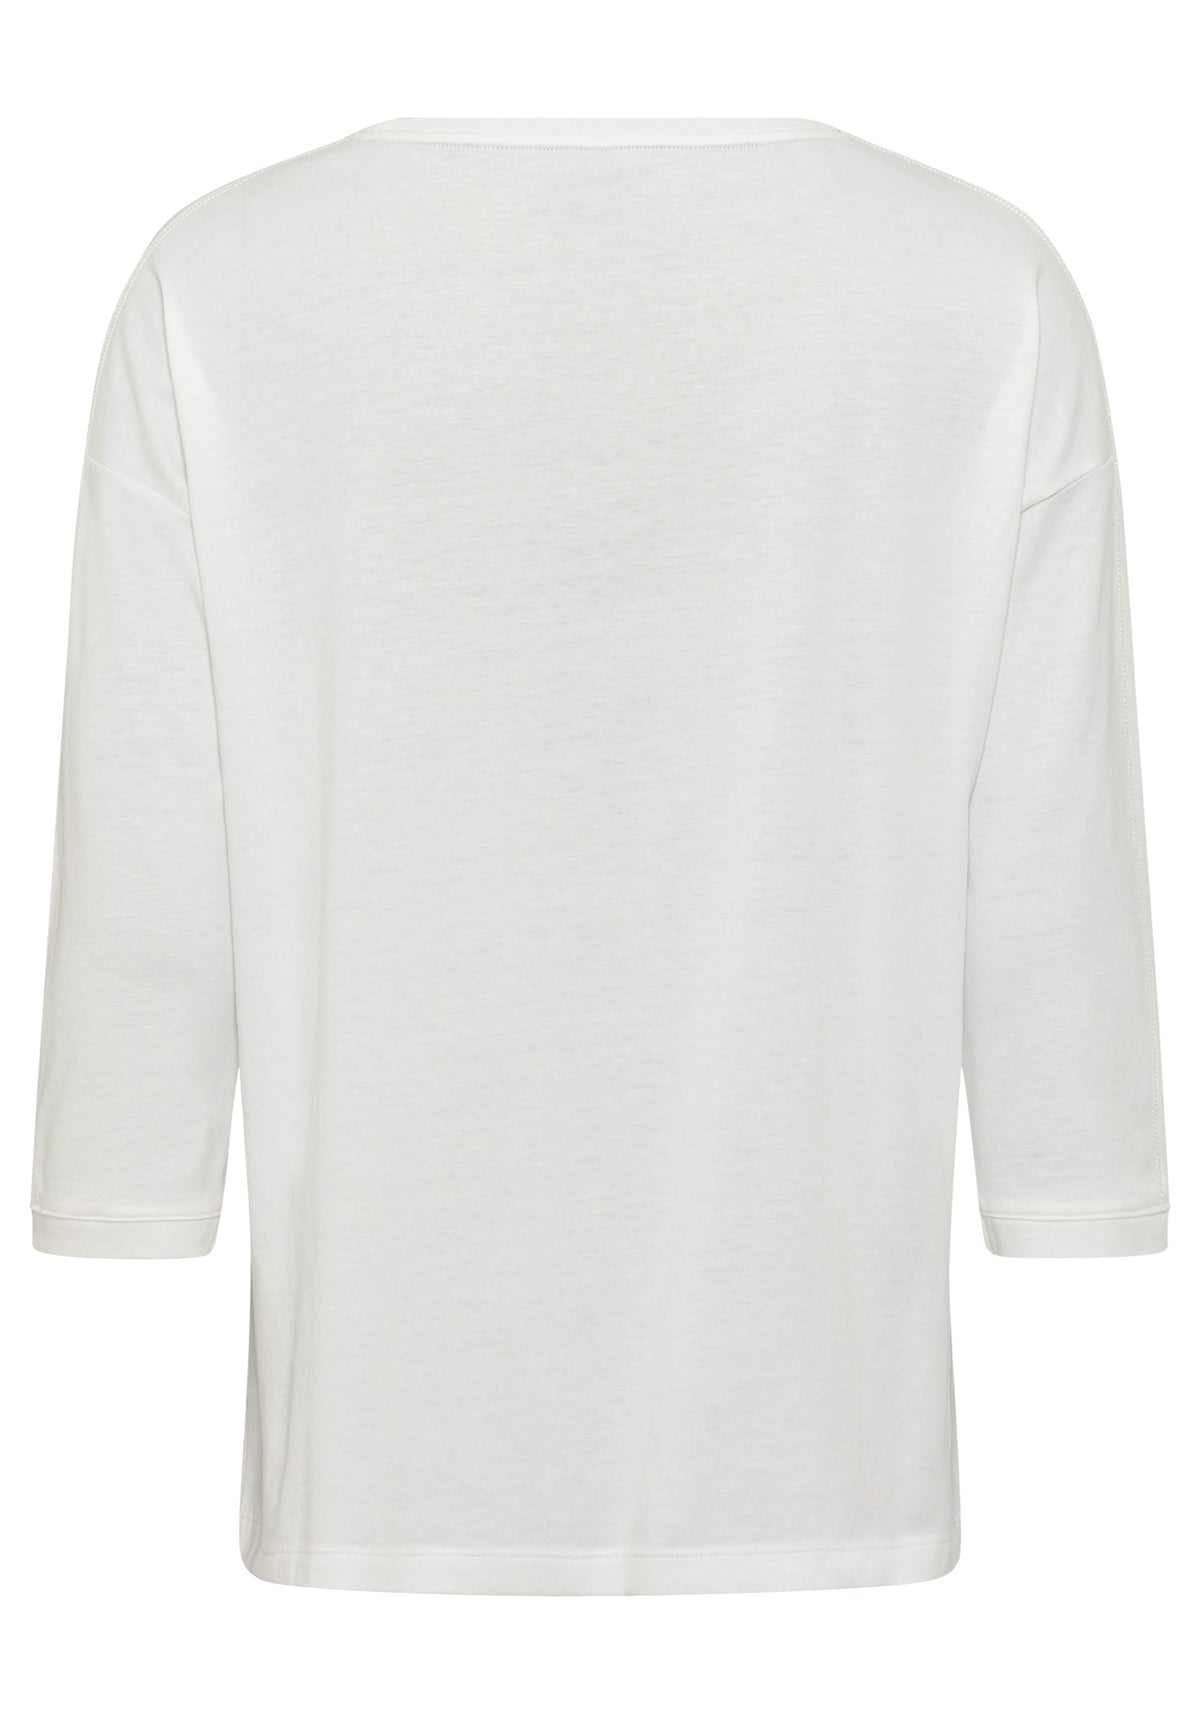 Cotton Blend 3/4 Sleeve Embellished Boat Neck T-Shirt containing TENCEL™ Modal